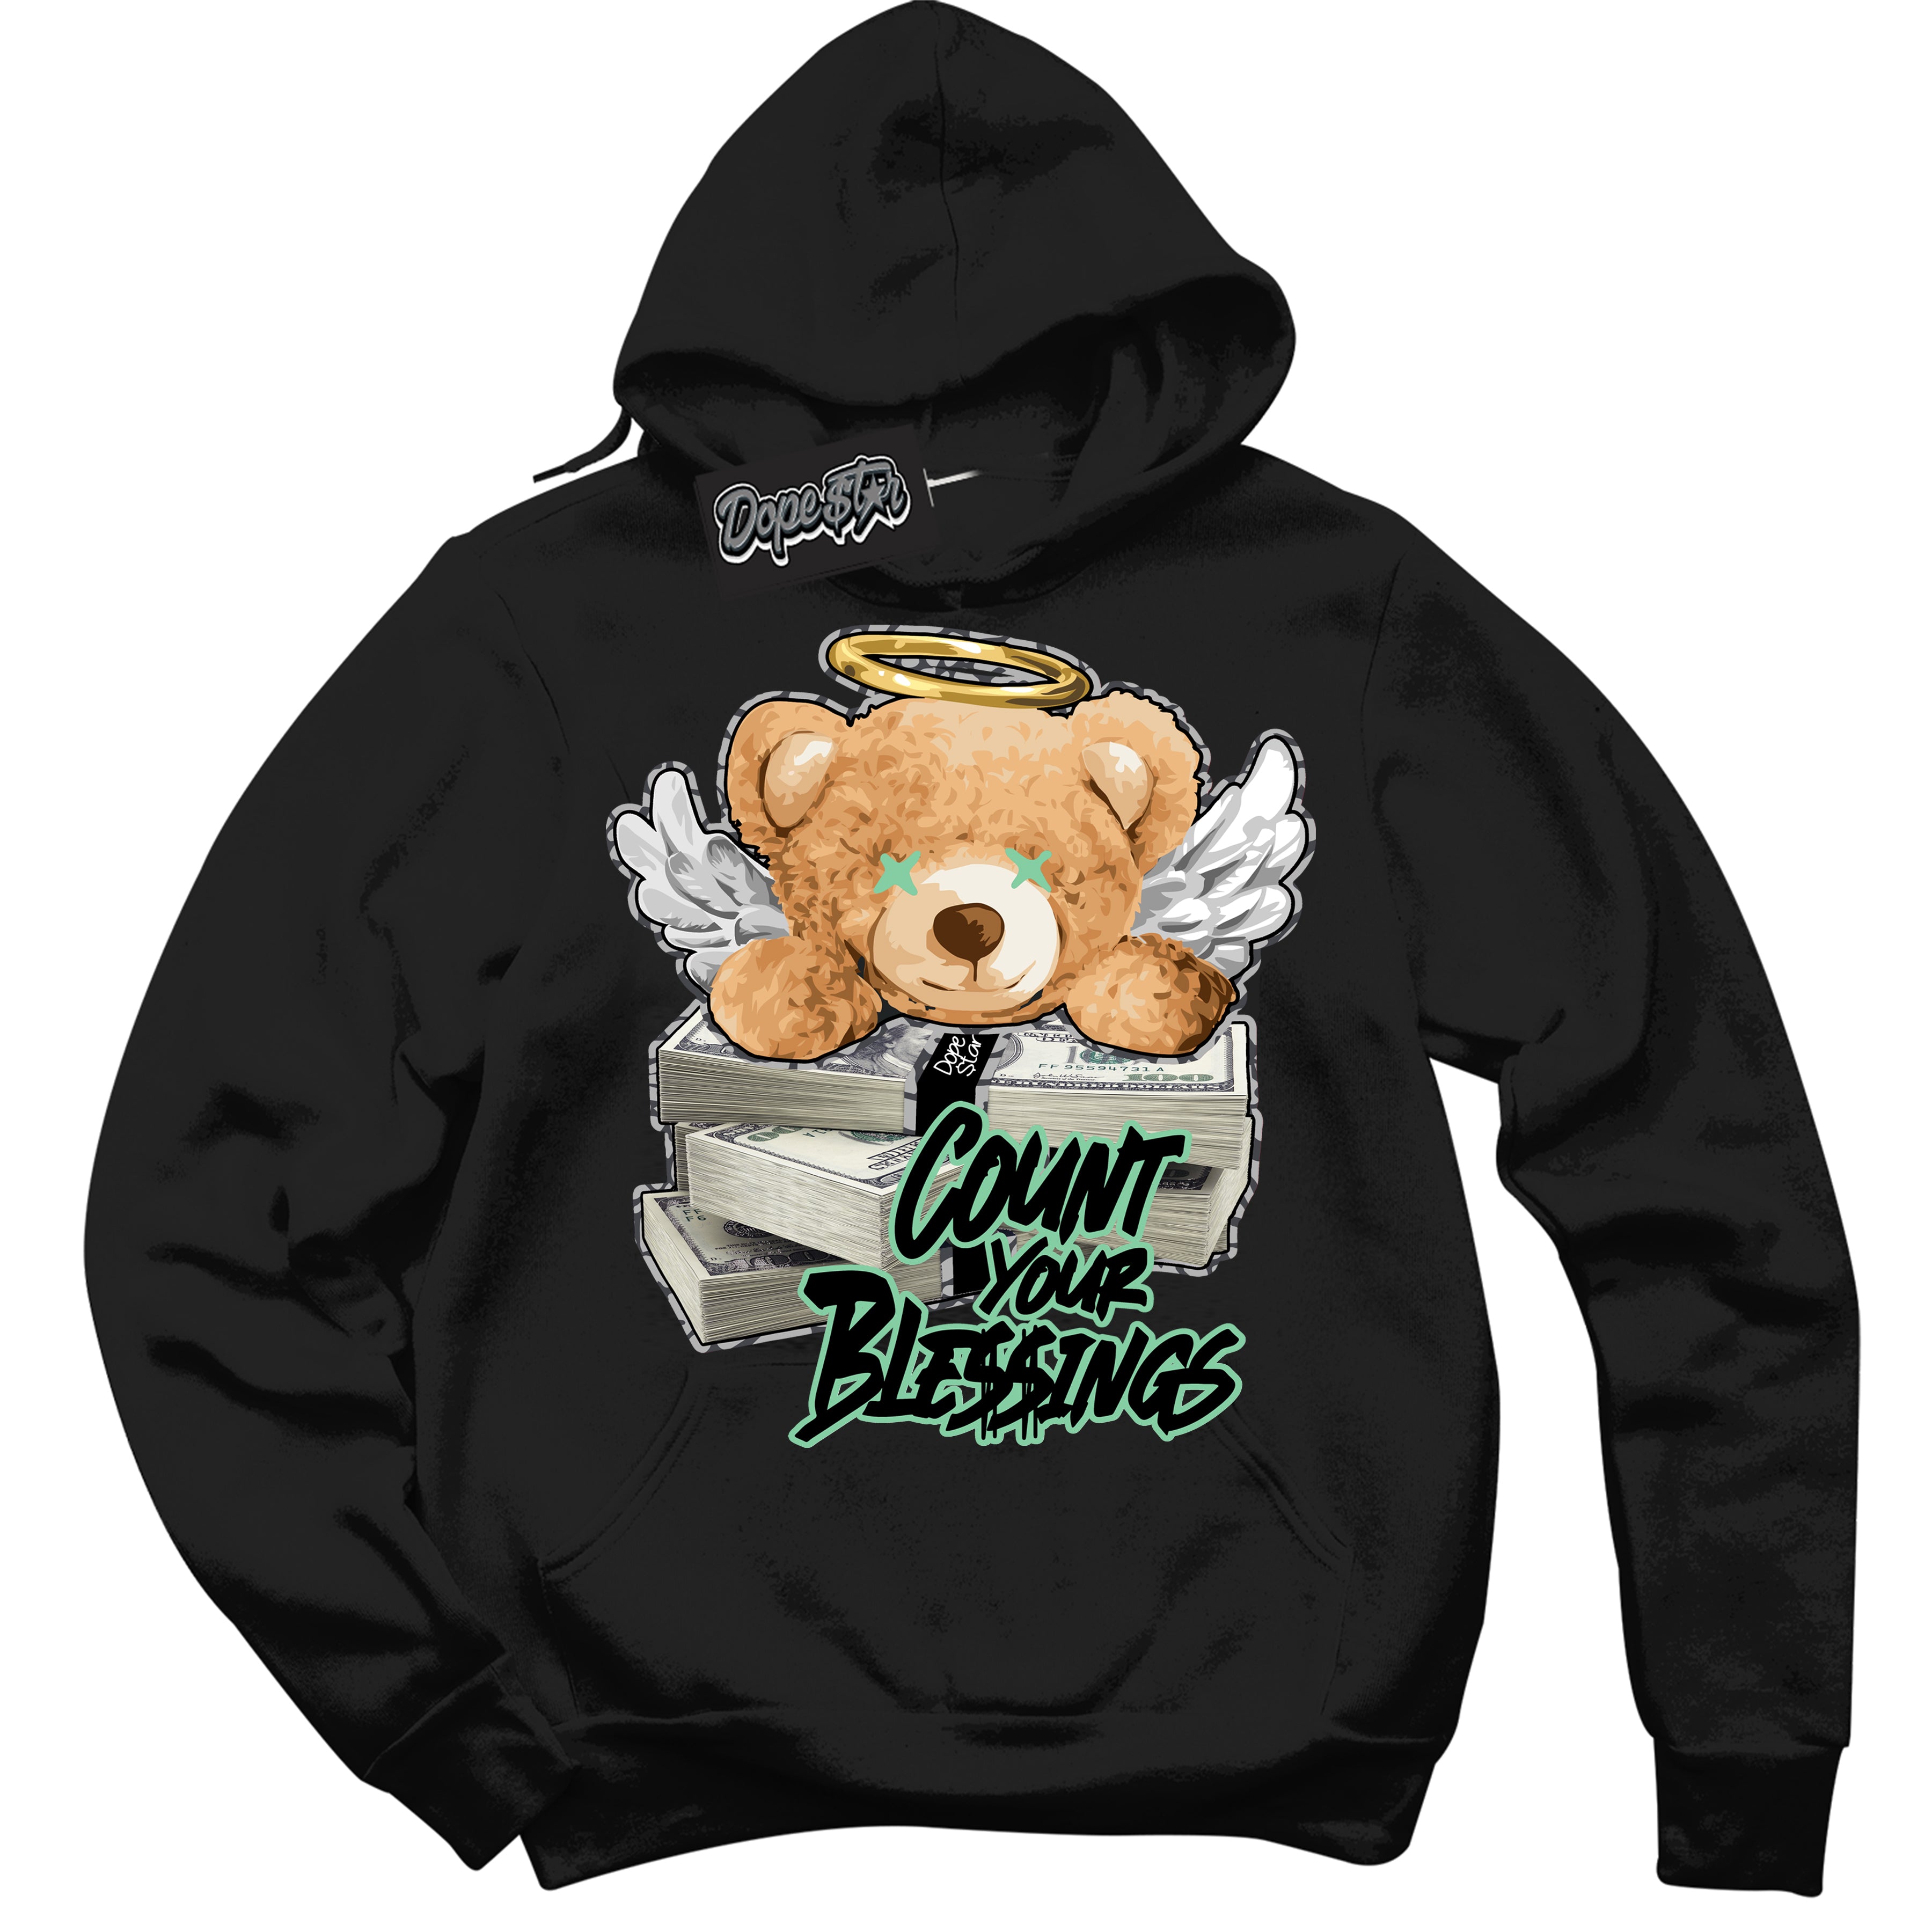 Cool Black Graphic DopeStar Hoodie with “ Count Your Blessings “ print, that perfectly matches Green Glow 3S sneakers